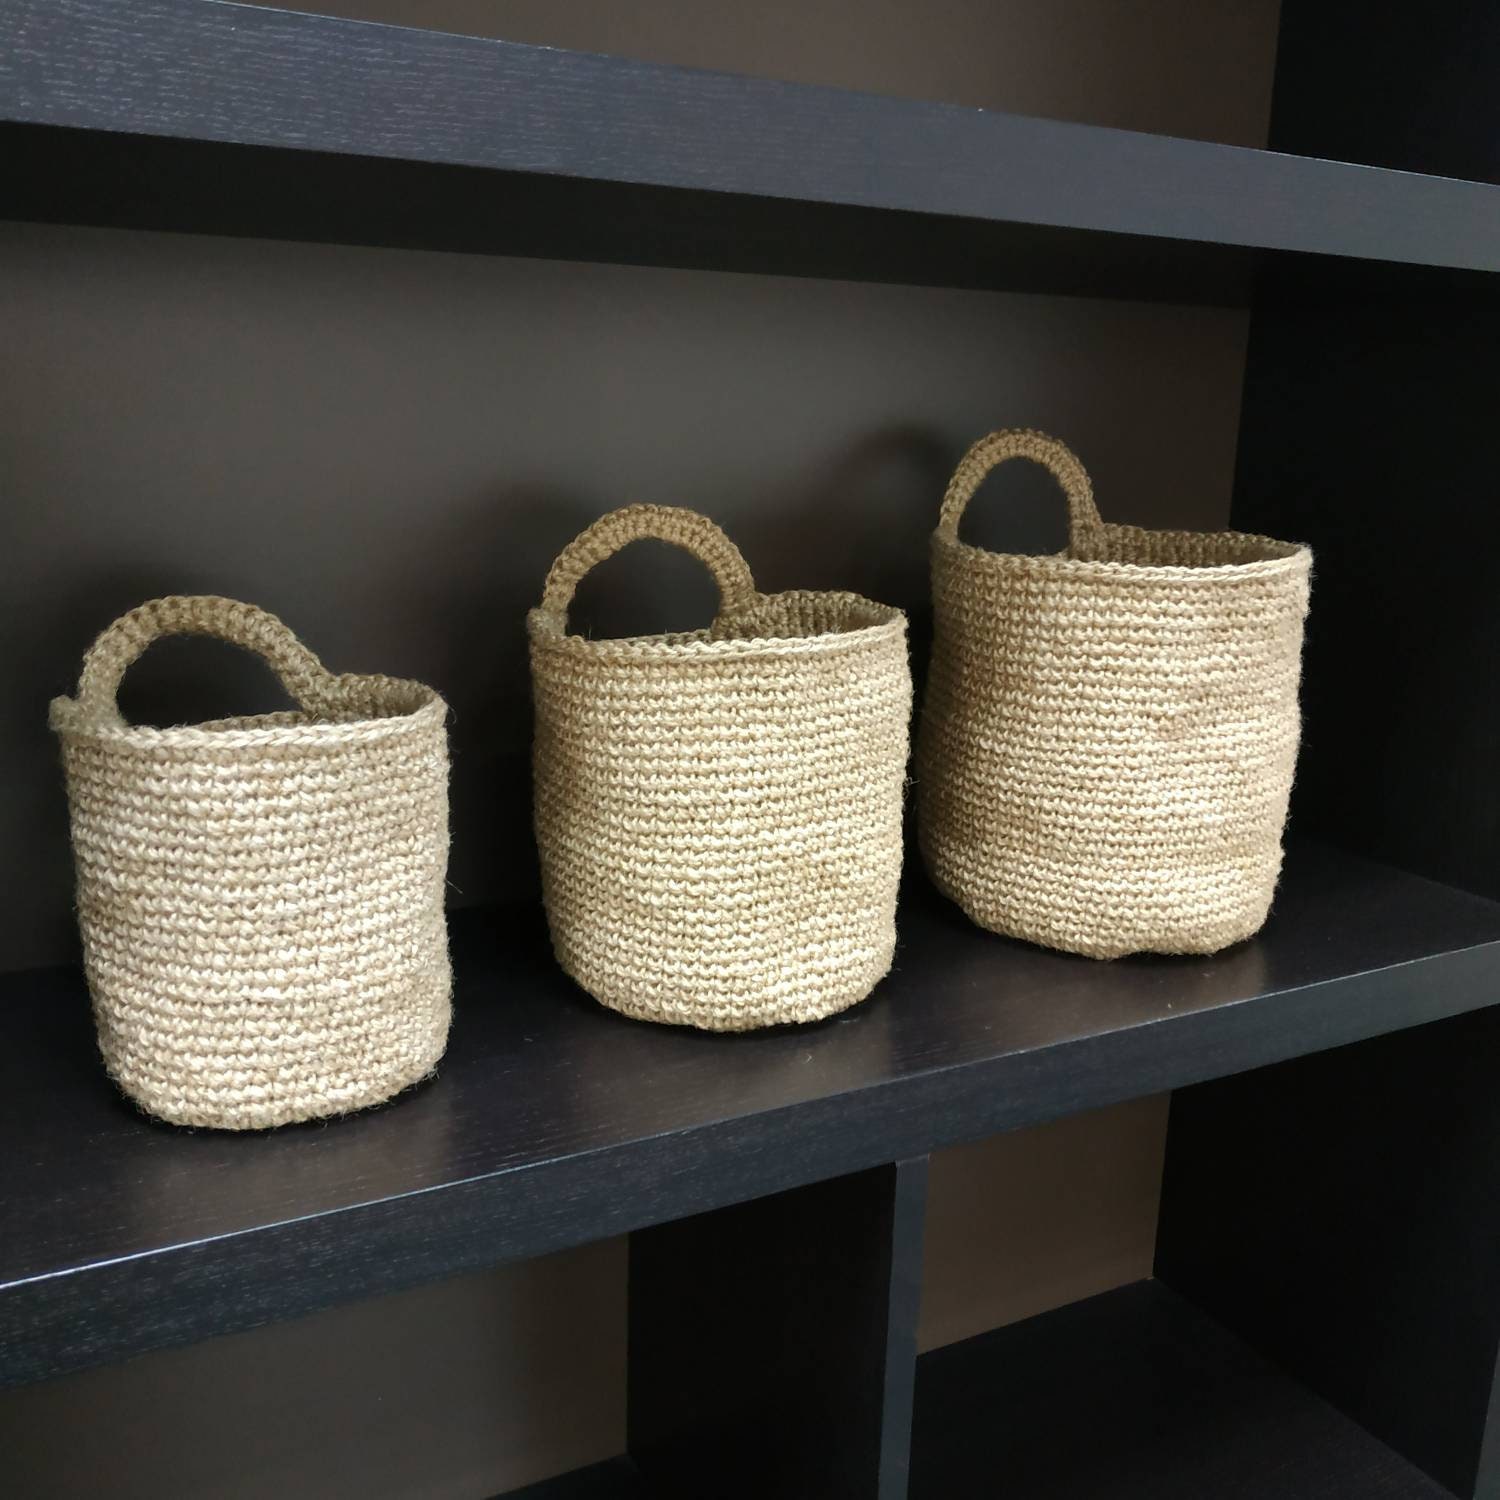 Global Goods Partners Handwoven Jute Nesting Storage Baskets, 3 Sizes or  Set of 3 on Food52